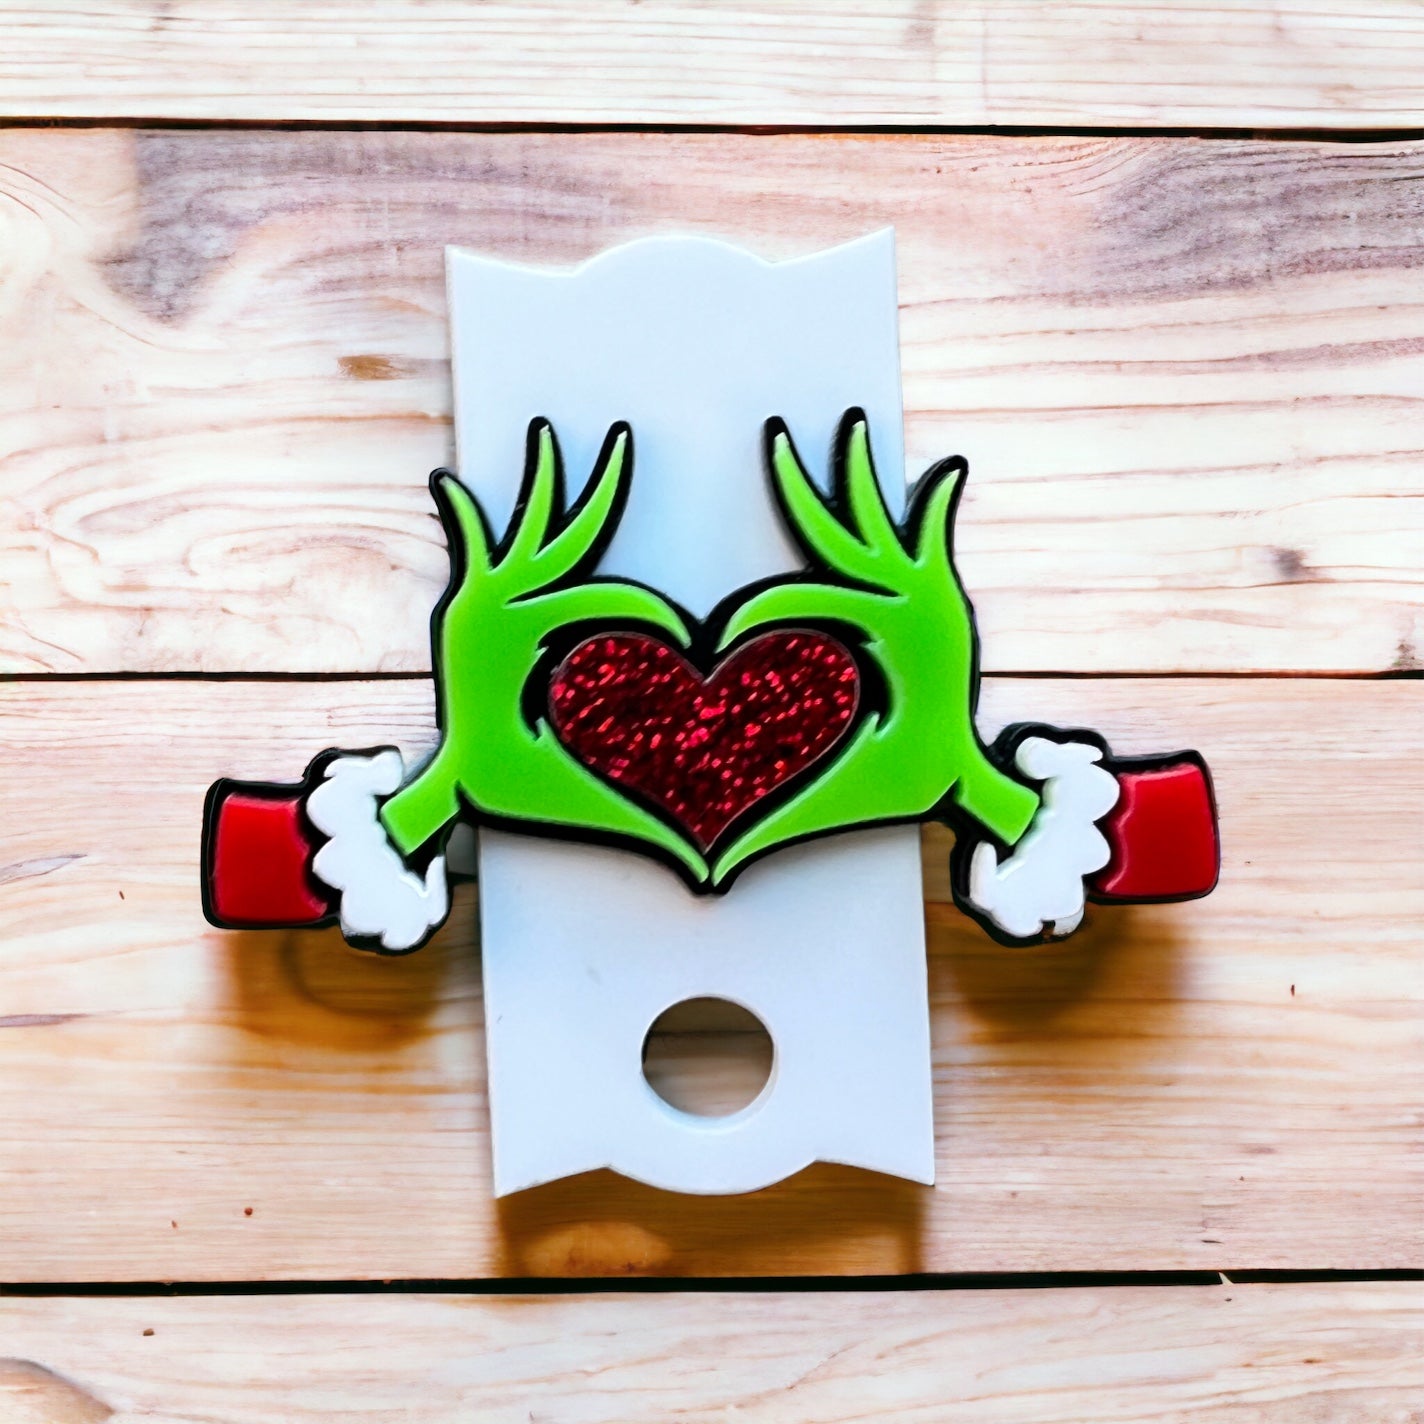 Grinch 3D Name Plates